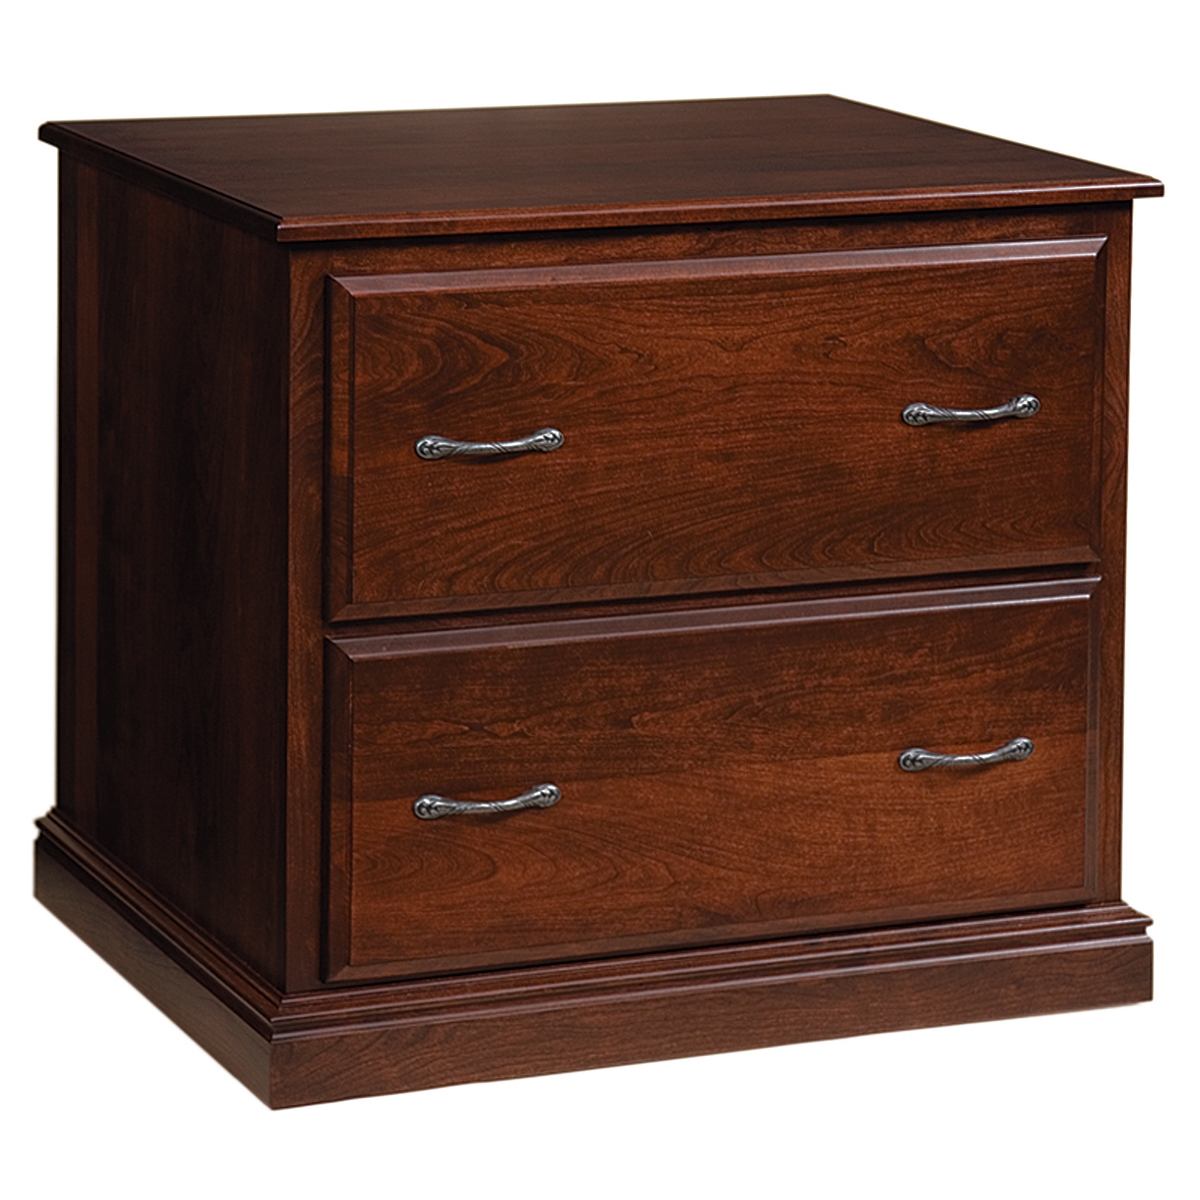 Ridge Ave Lateral File Cabinet Image